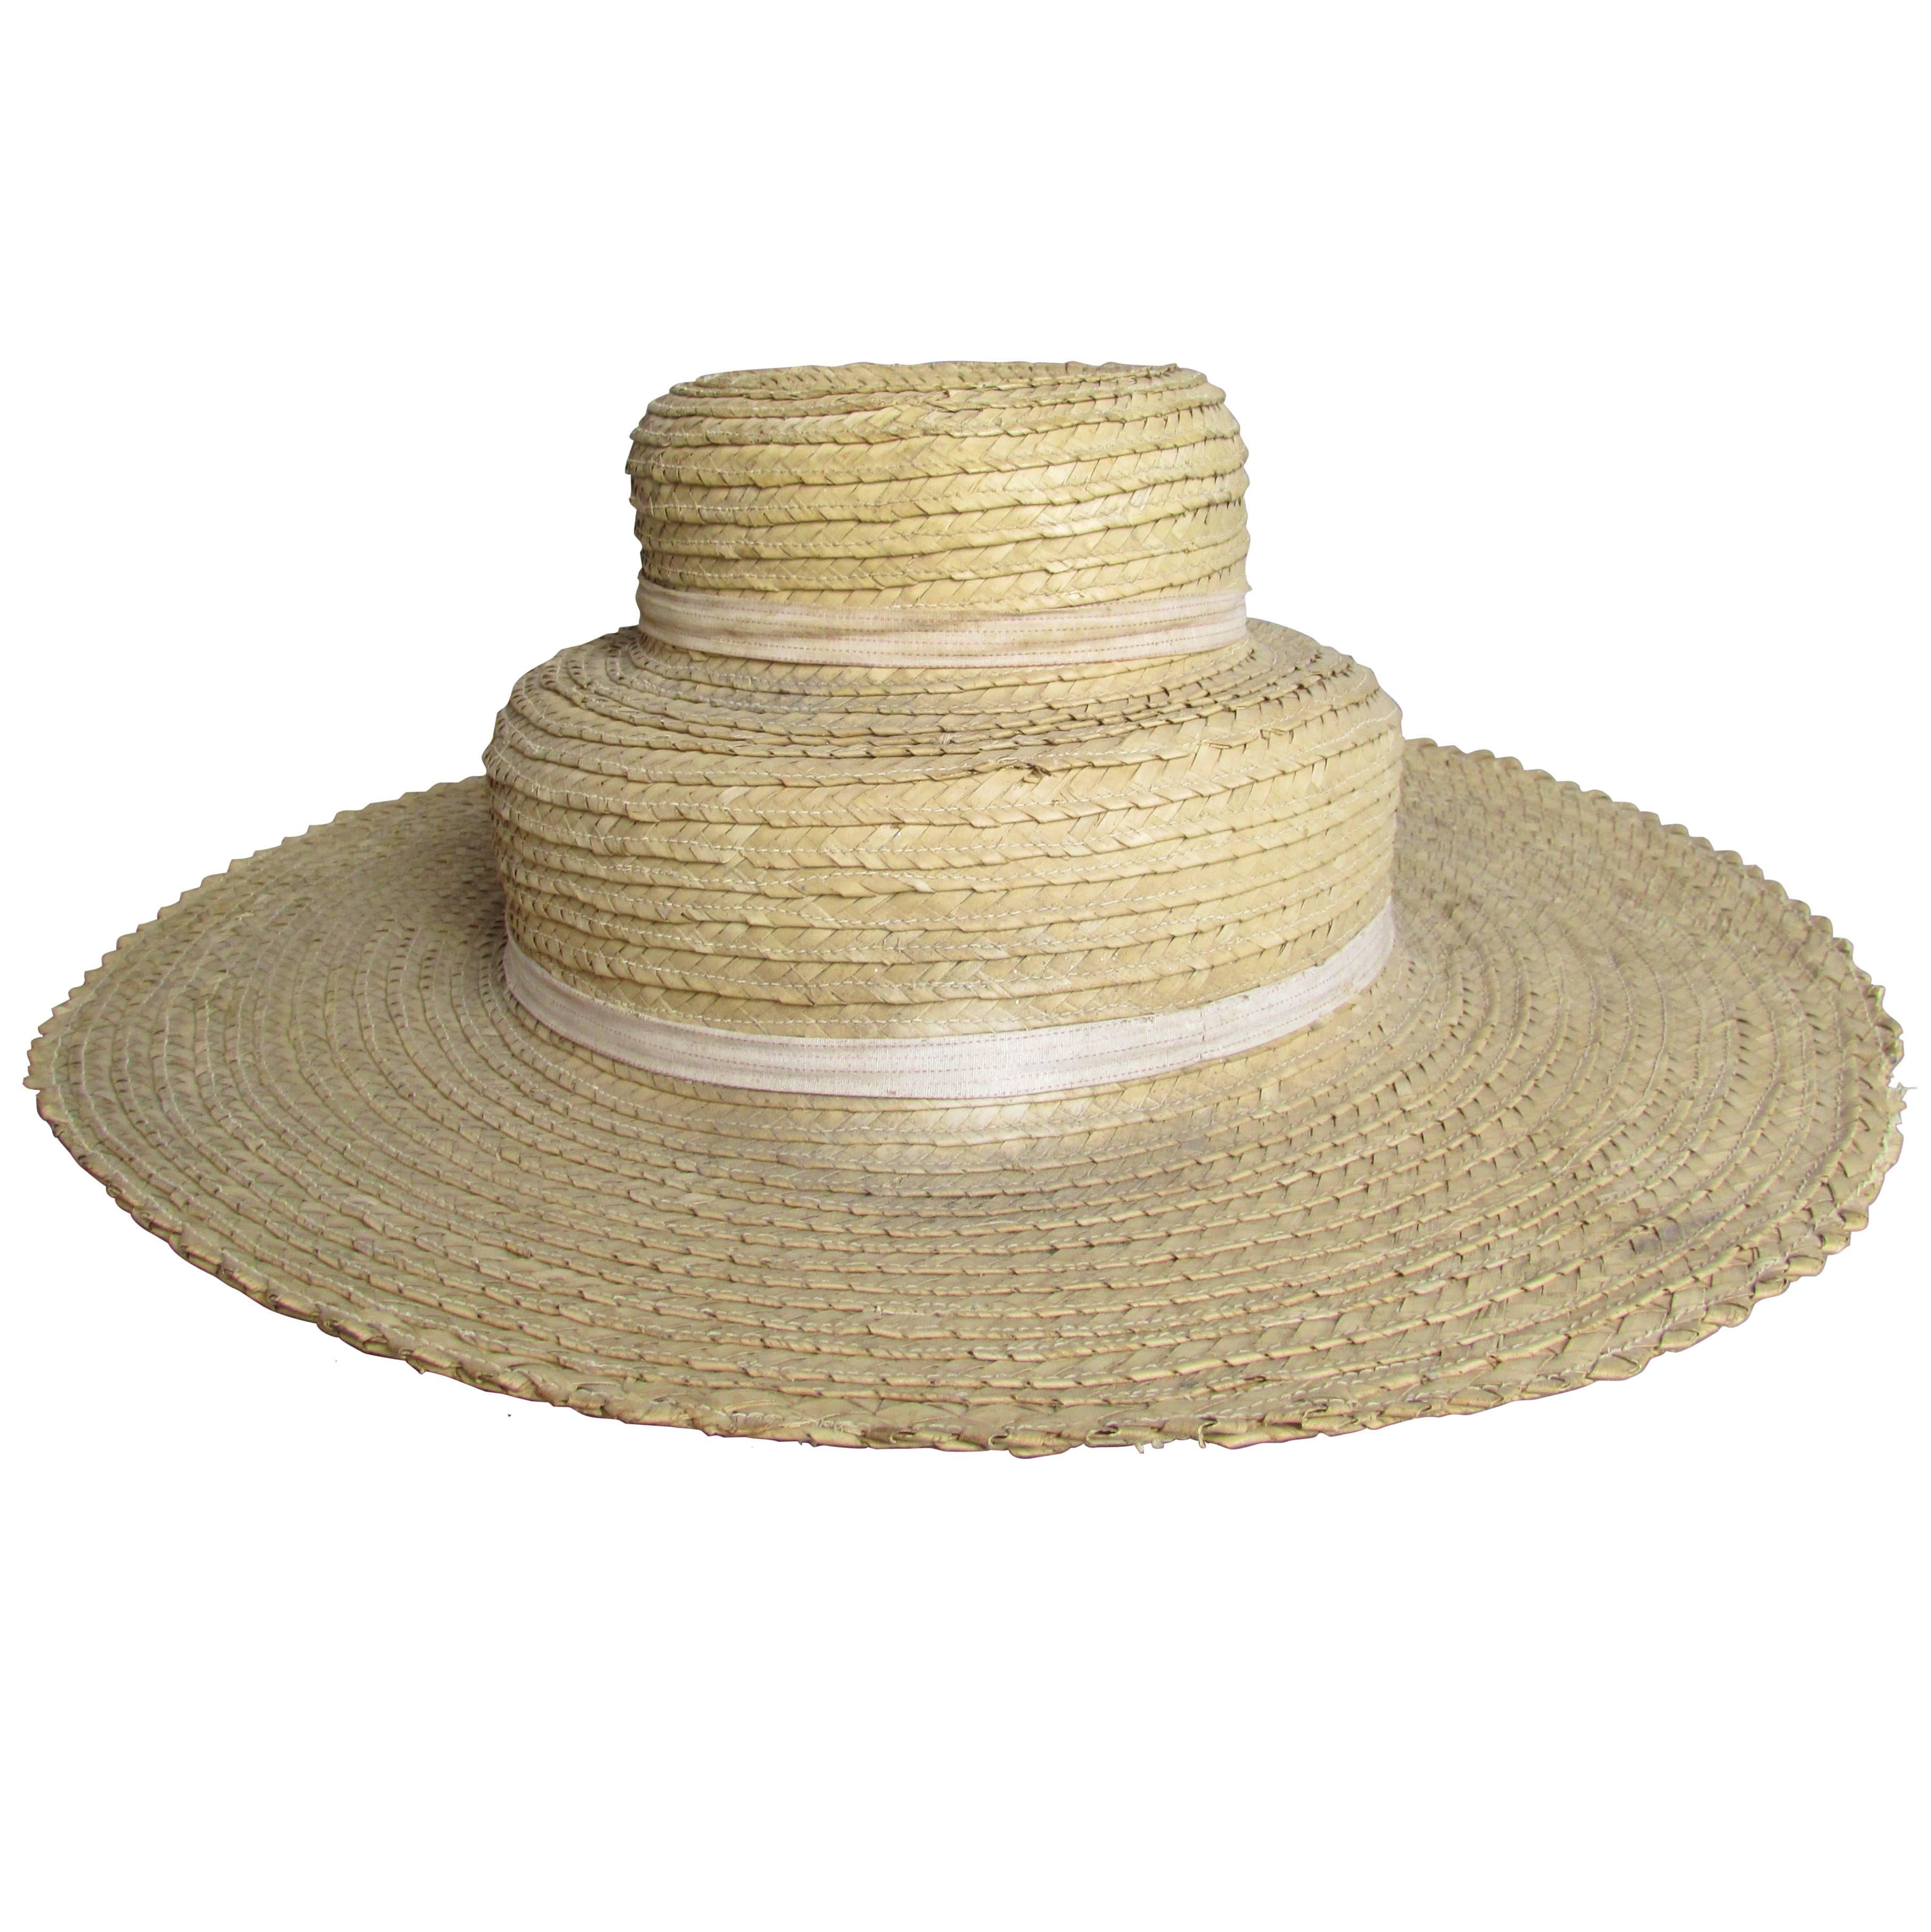 Early Two-Tiered Shaker Hat